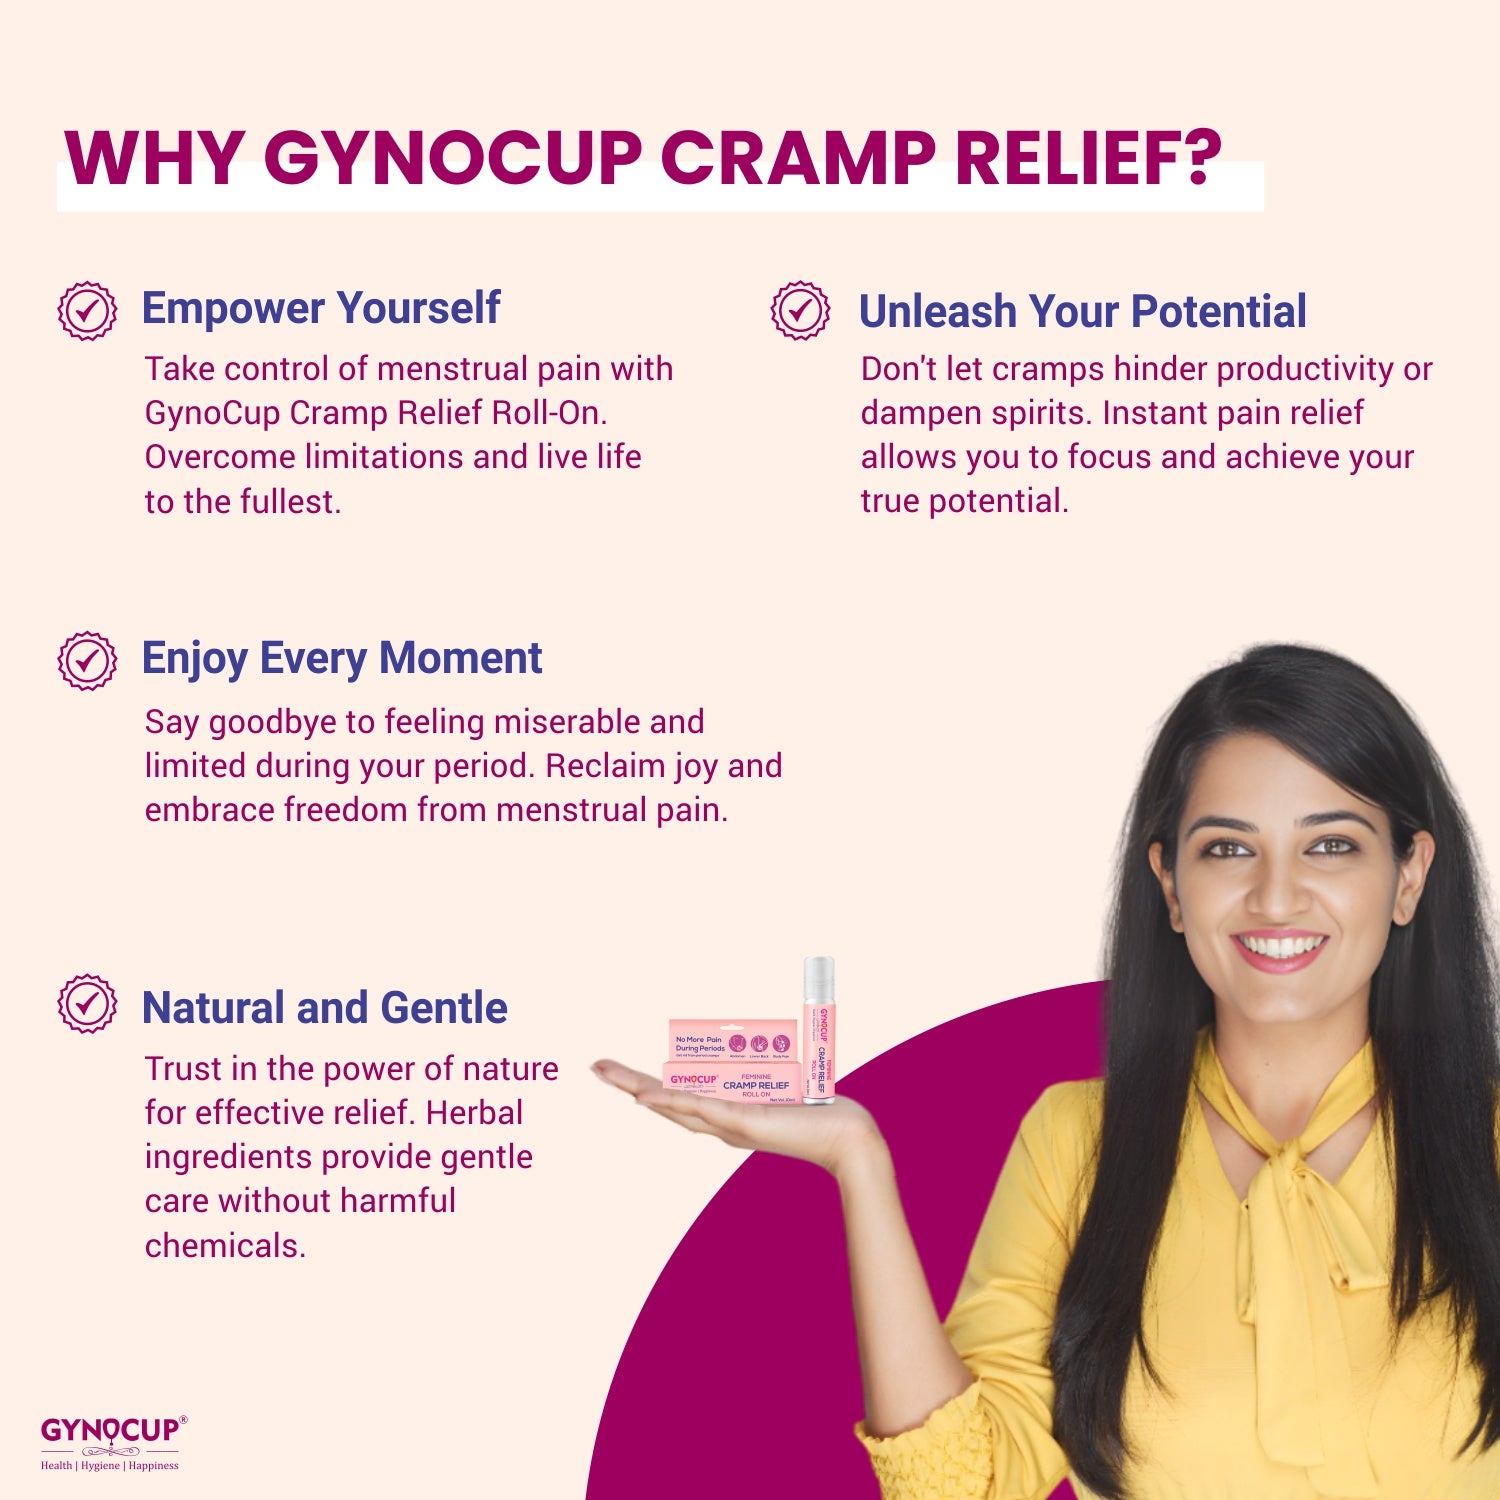 Gynocup Feminine Cramp Relief Roll On All in One (Periods, Lower Back Pain & Body Pain)